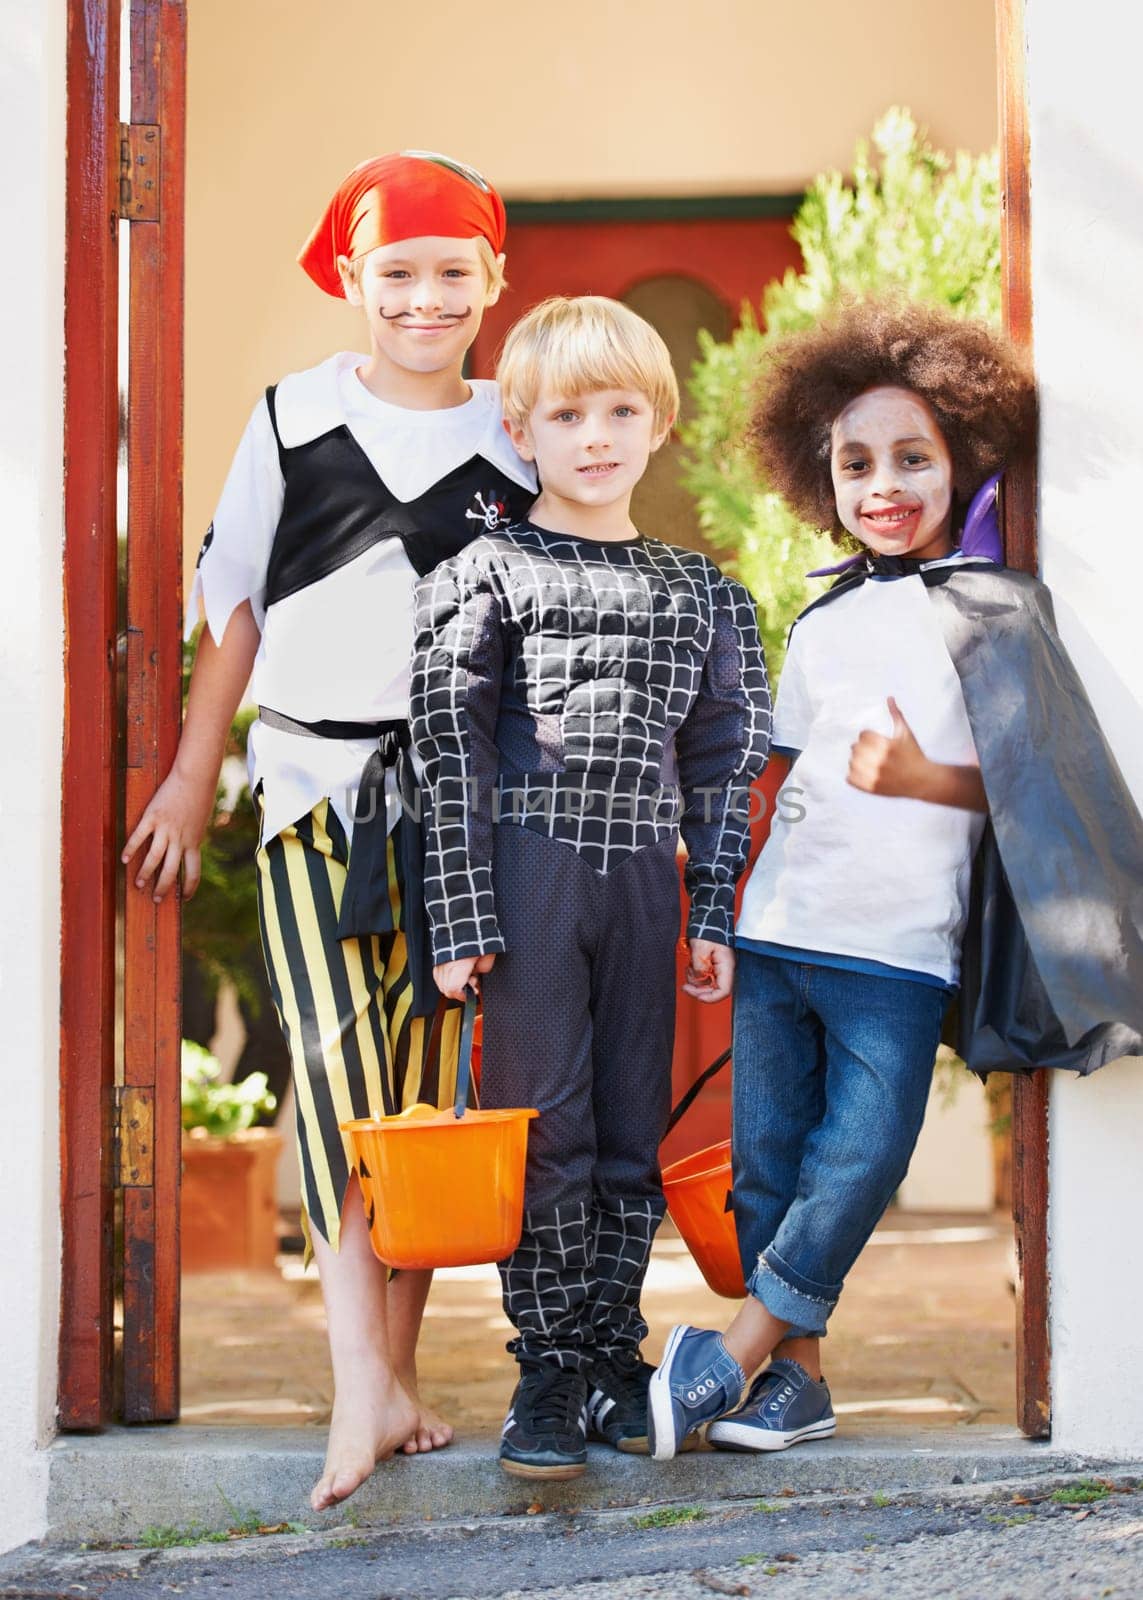 What wonderful costumes. Little children trick-or-treating on halloween